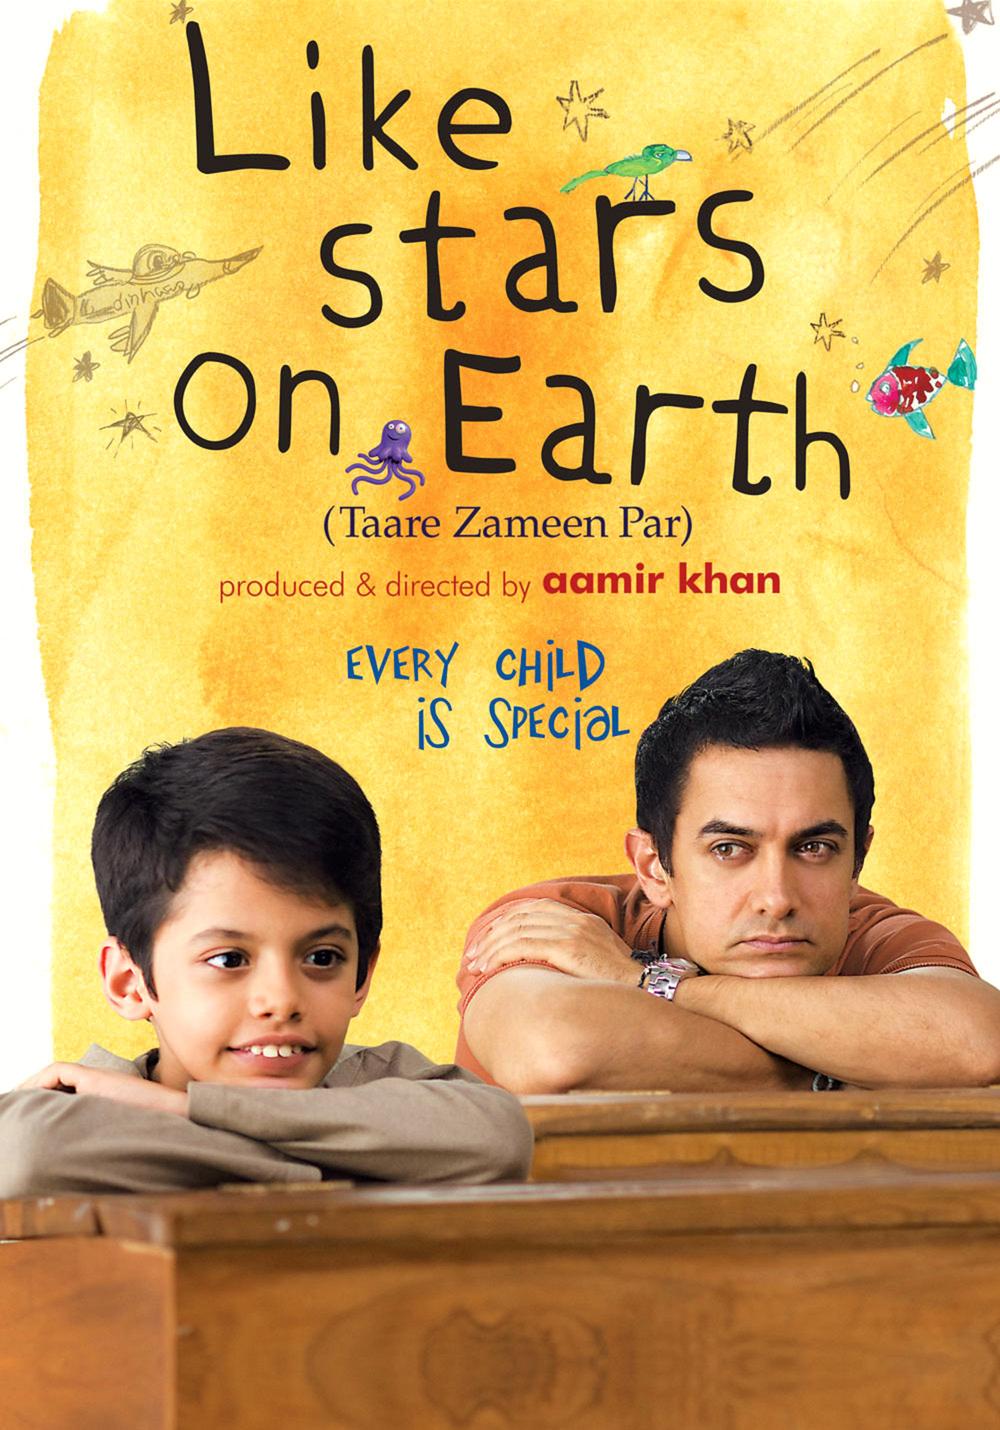 Taare Zameen Par strikes a chord with its heartrending portrayal of recognizing and nurturing individual talents. The film underscores the need for an education system that accommodates diverse learning styles, celebrating the unique strengths of each child.